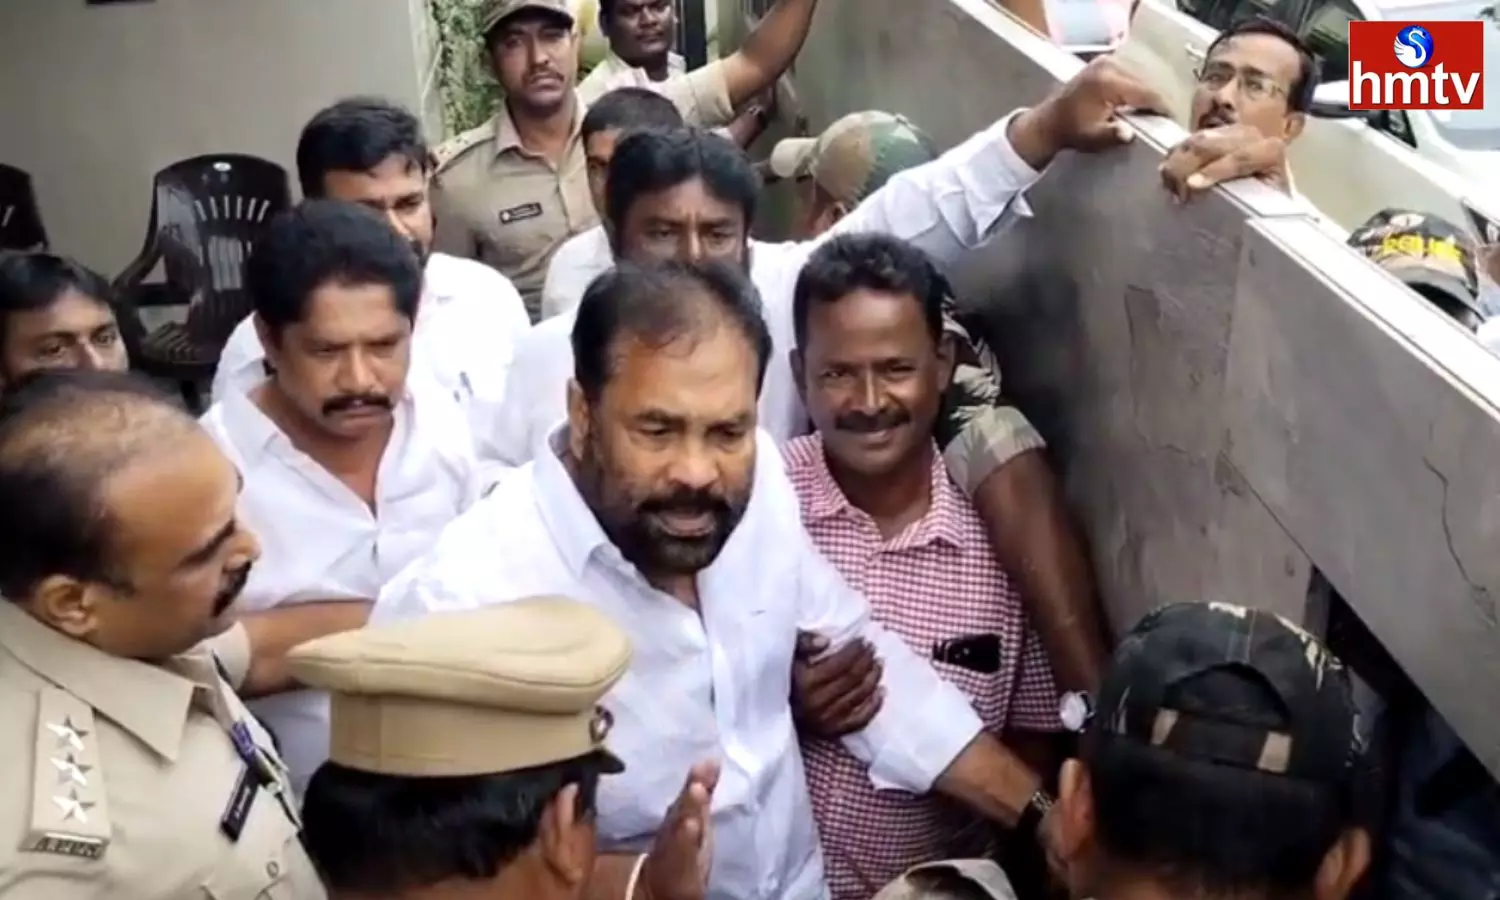 Nellore Rural MLA Kotamreddy Sridhar Reddy Once Again Fired At The Police